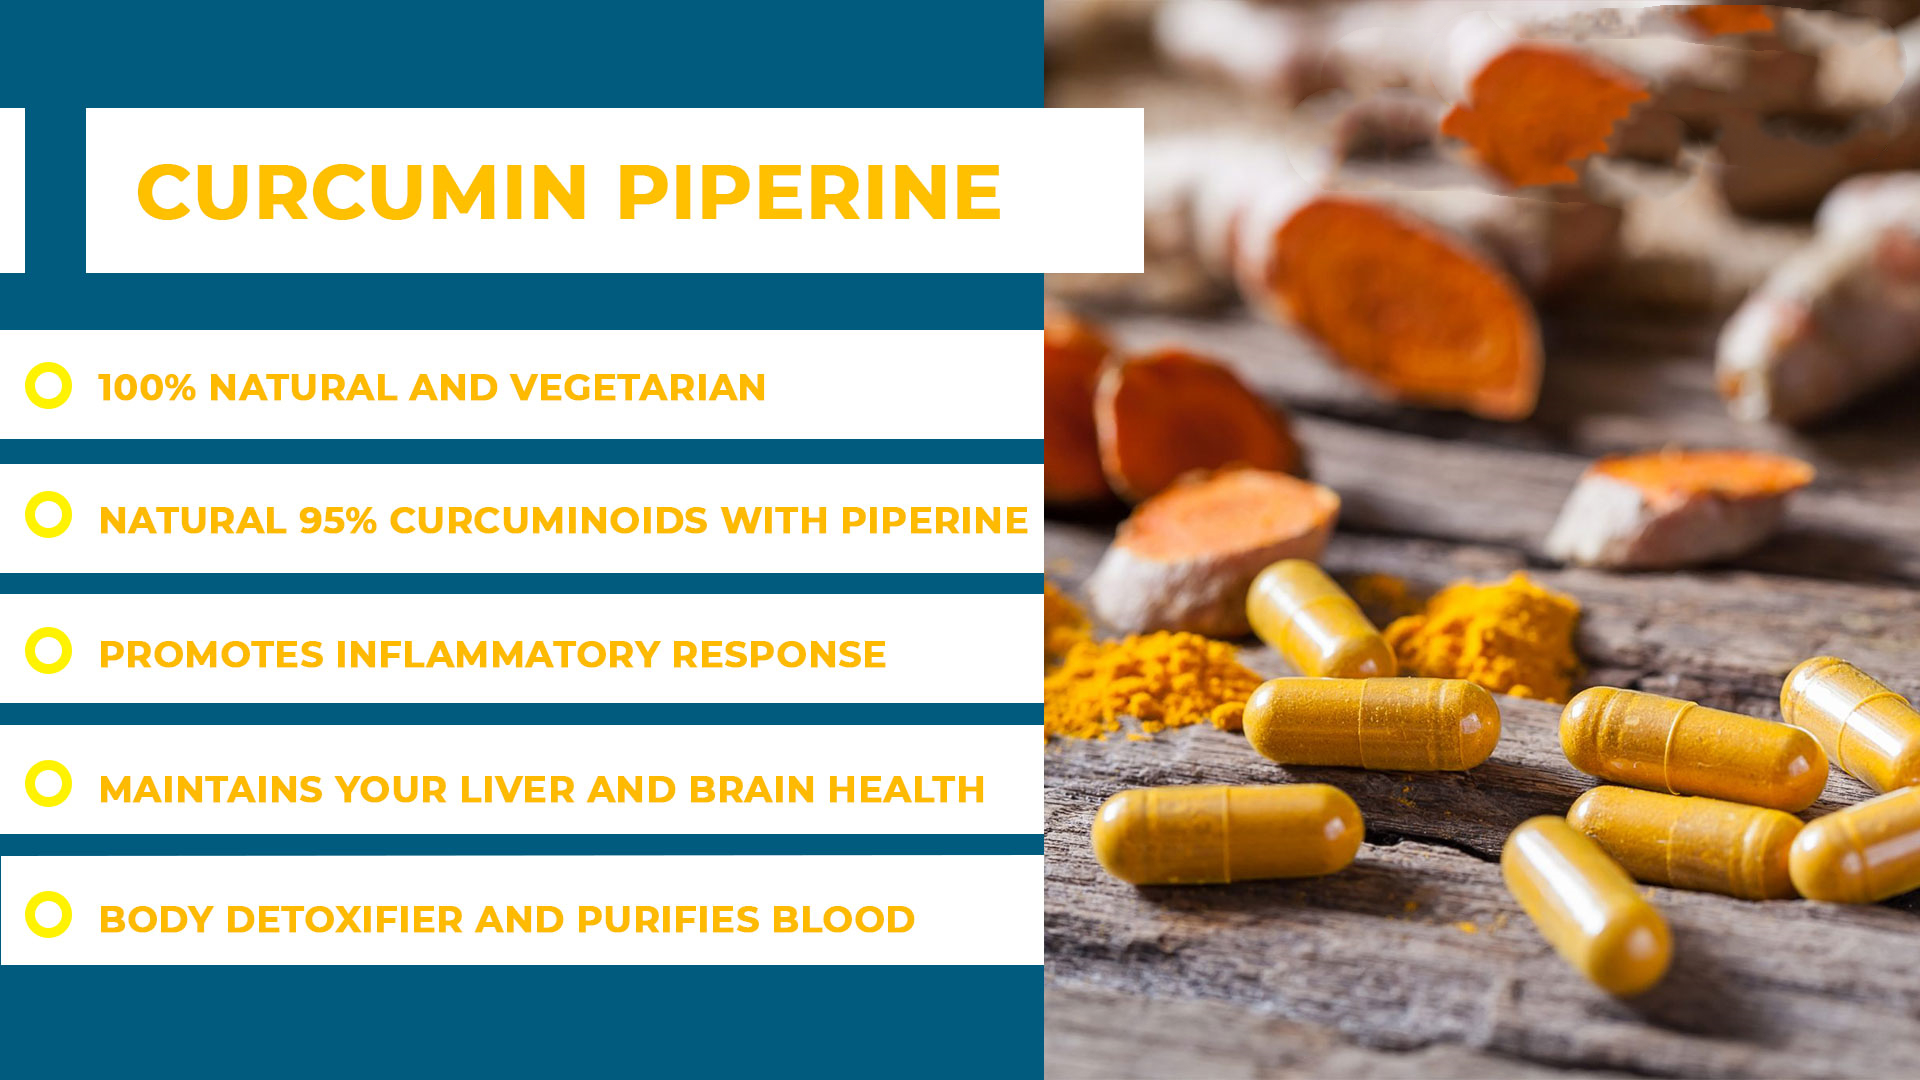 Why is curcumin the favorite to take a ride on piperine